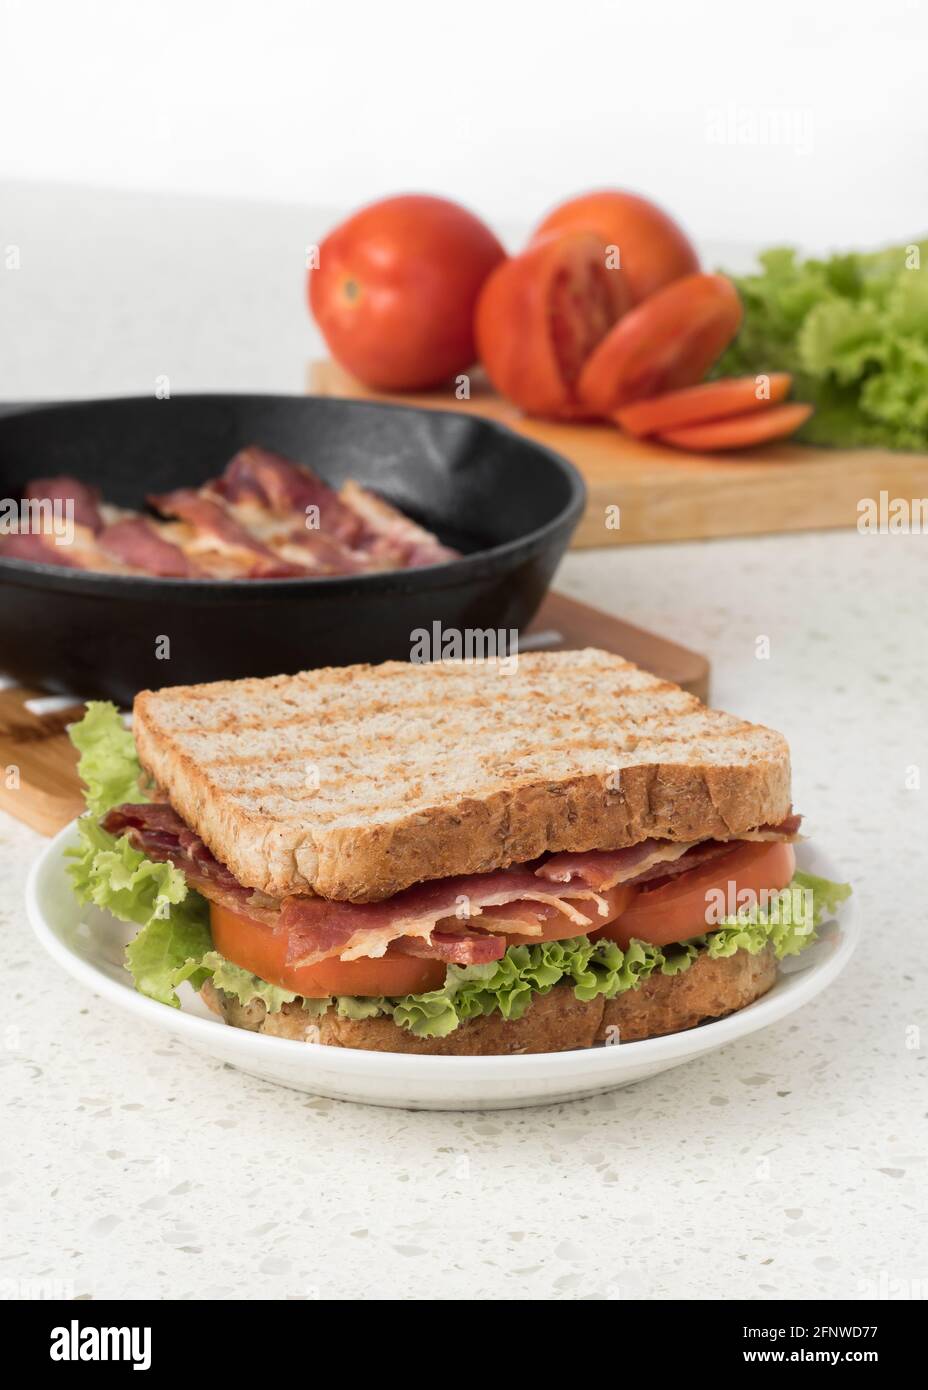 Grilled BLT Sandwich with bacon, tomato, lettuce, and whole wheat bread Stock Photo